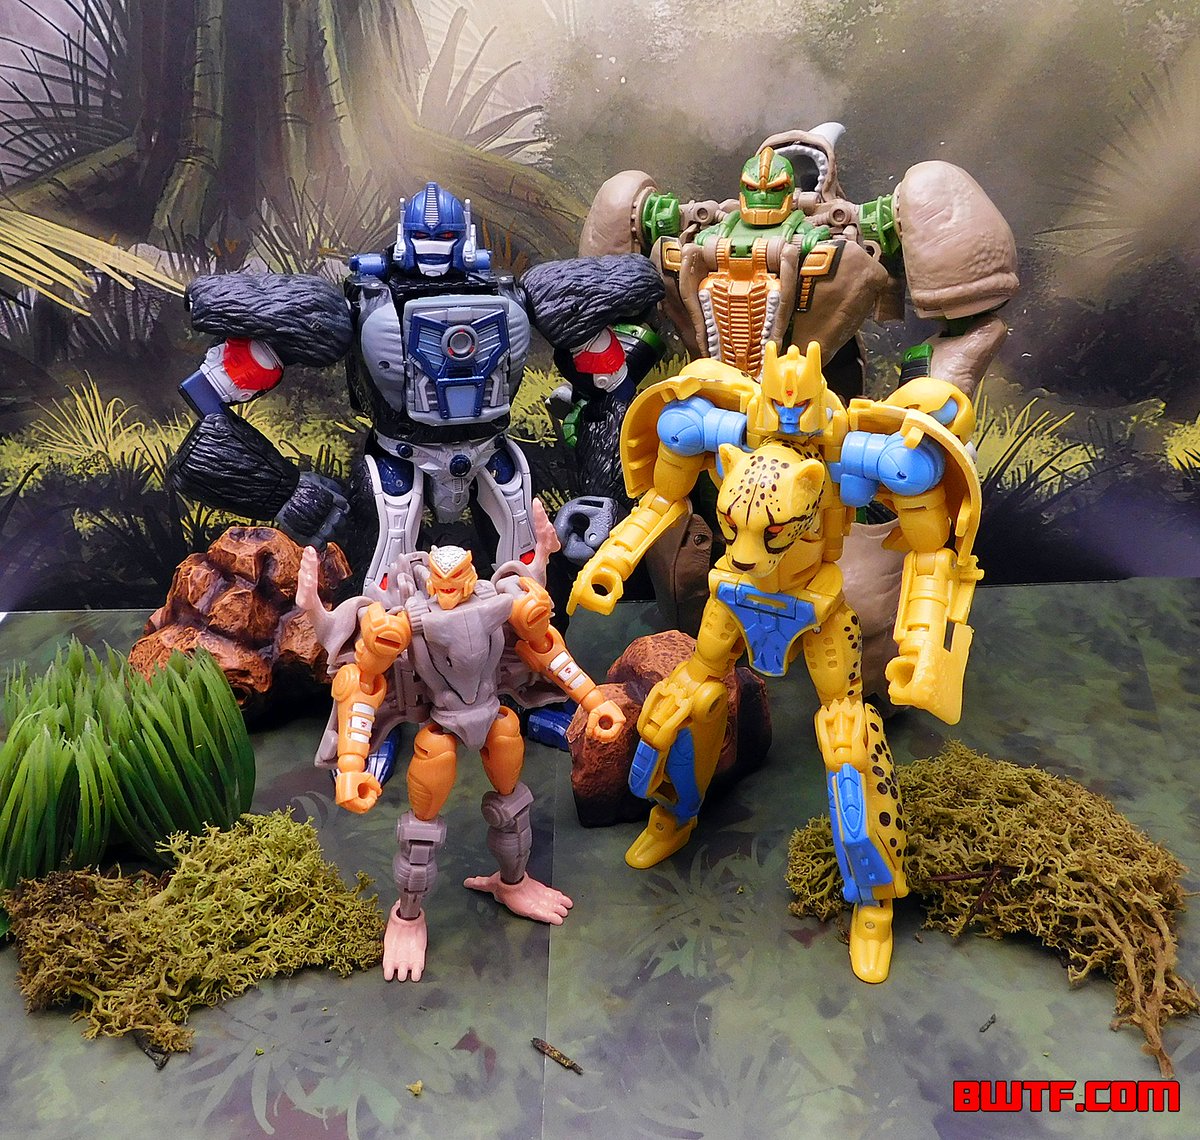 I have been wanting to take this photo for MONTHS! #Transformers #BeastWars #toys #actionfigures #actionfiguresphotography